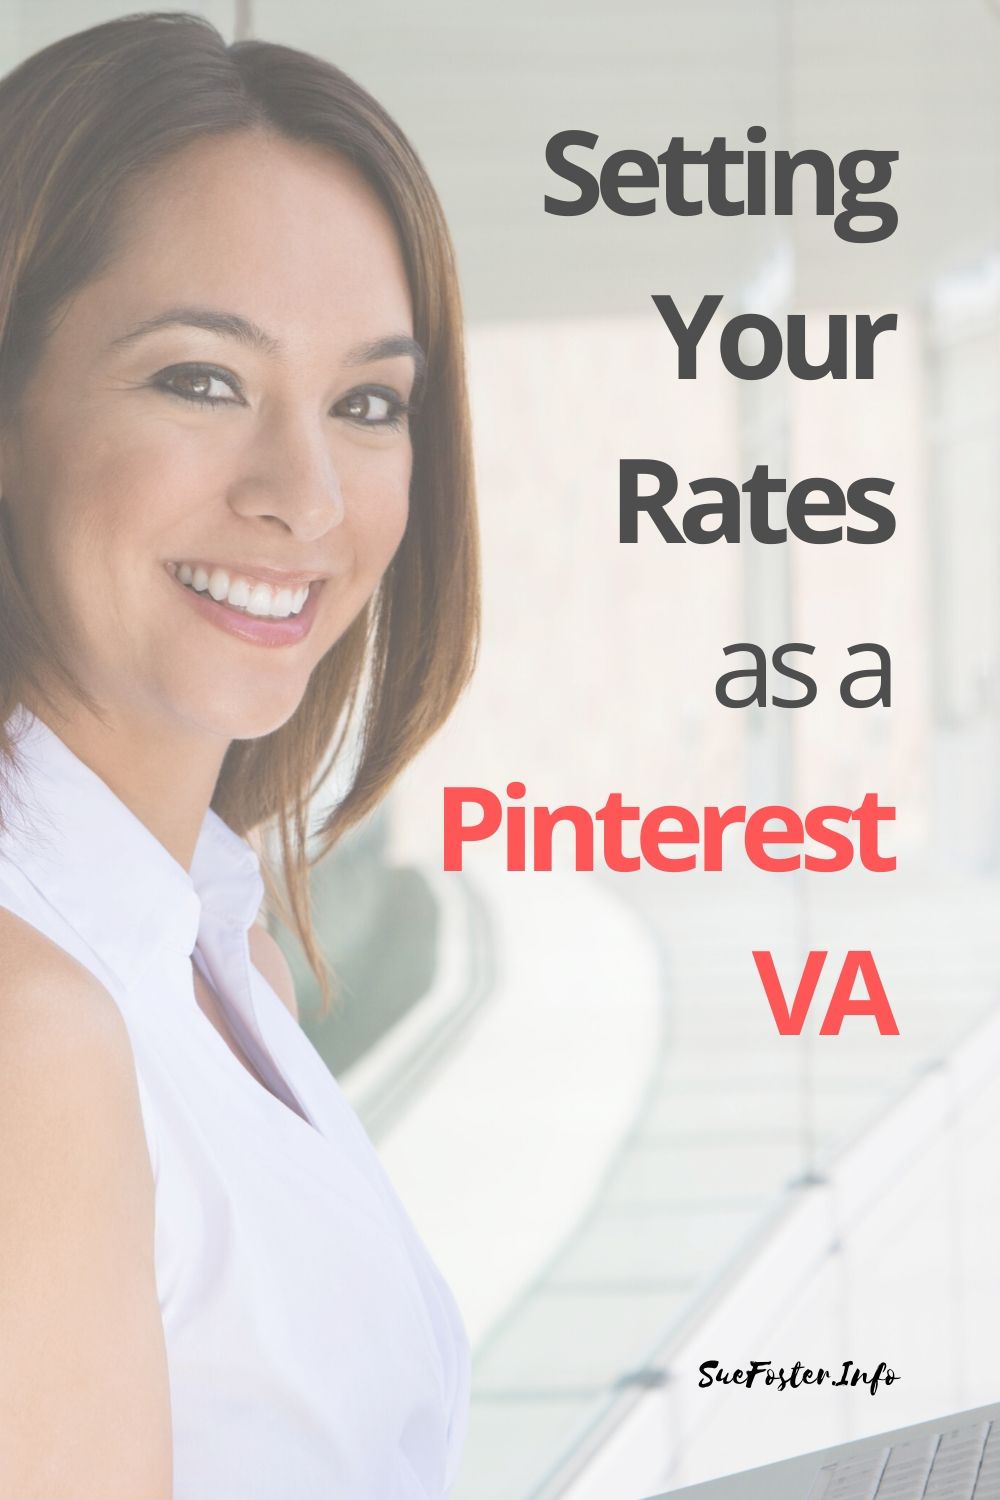 Learn how to set your rates as a Pinterest virtual VA confidently and attract quality clients. Avoid under pricing and grow your business effectively.